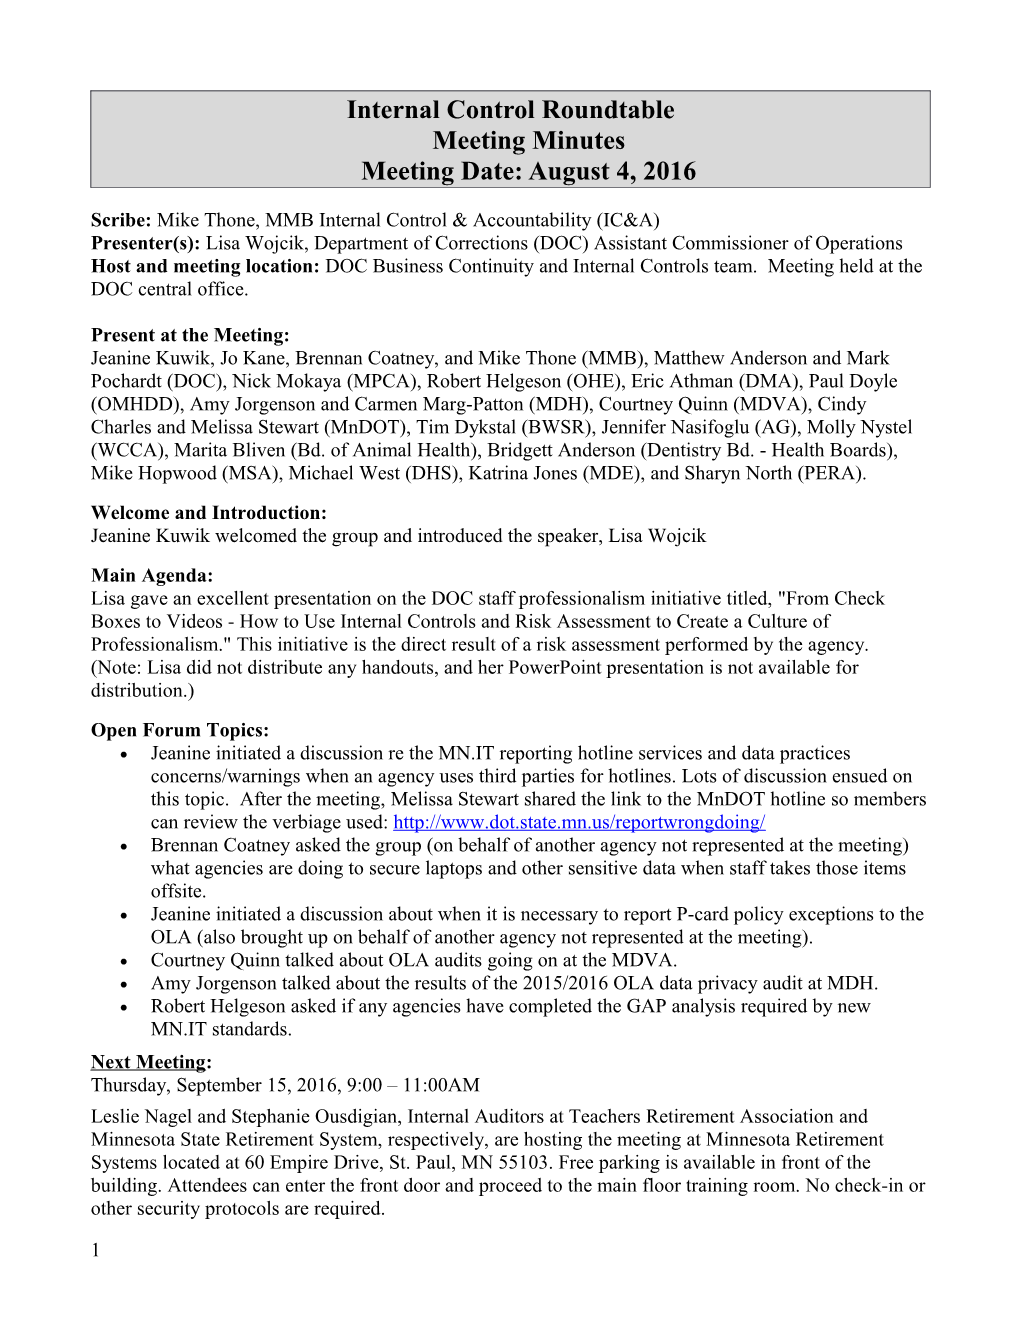 August 4, 2016 Internal Control Roundtable Meeting Minutes